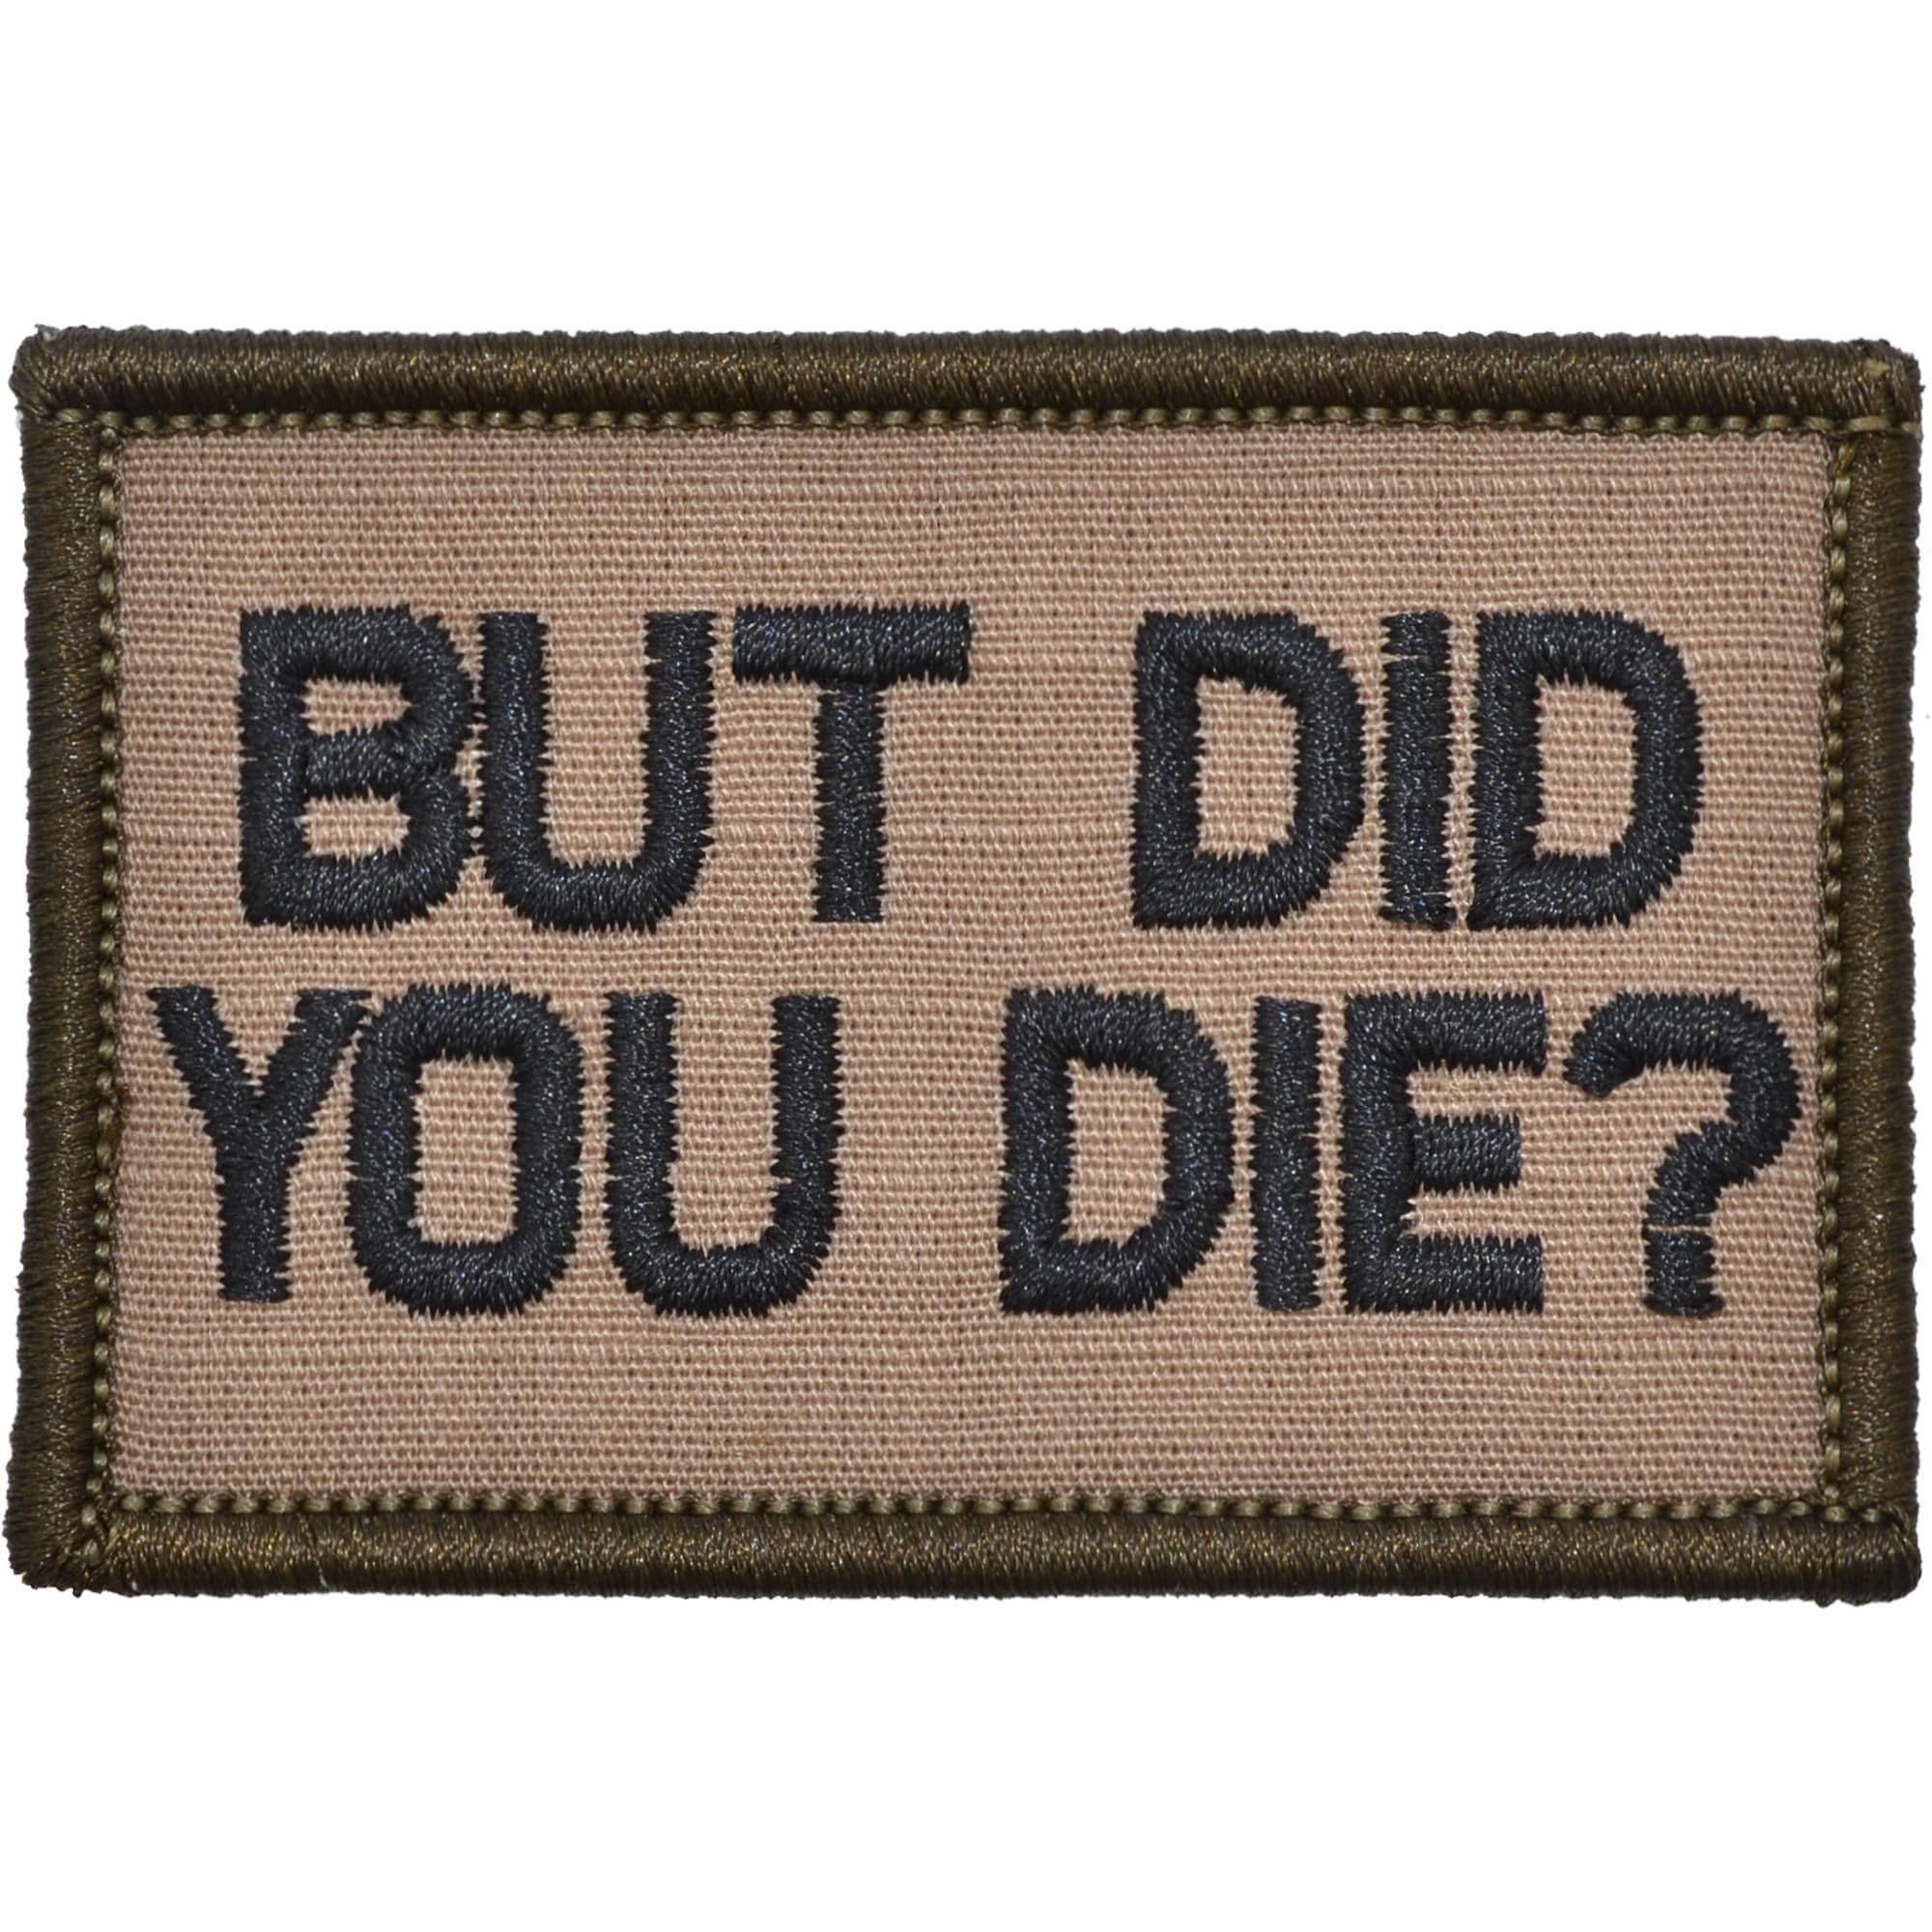 But Did You Die? - 2x3 Patch